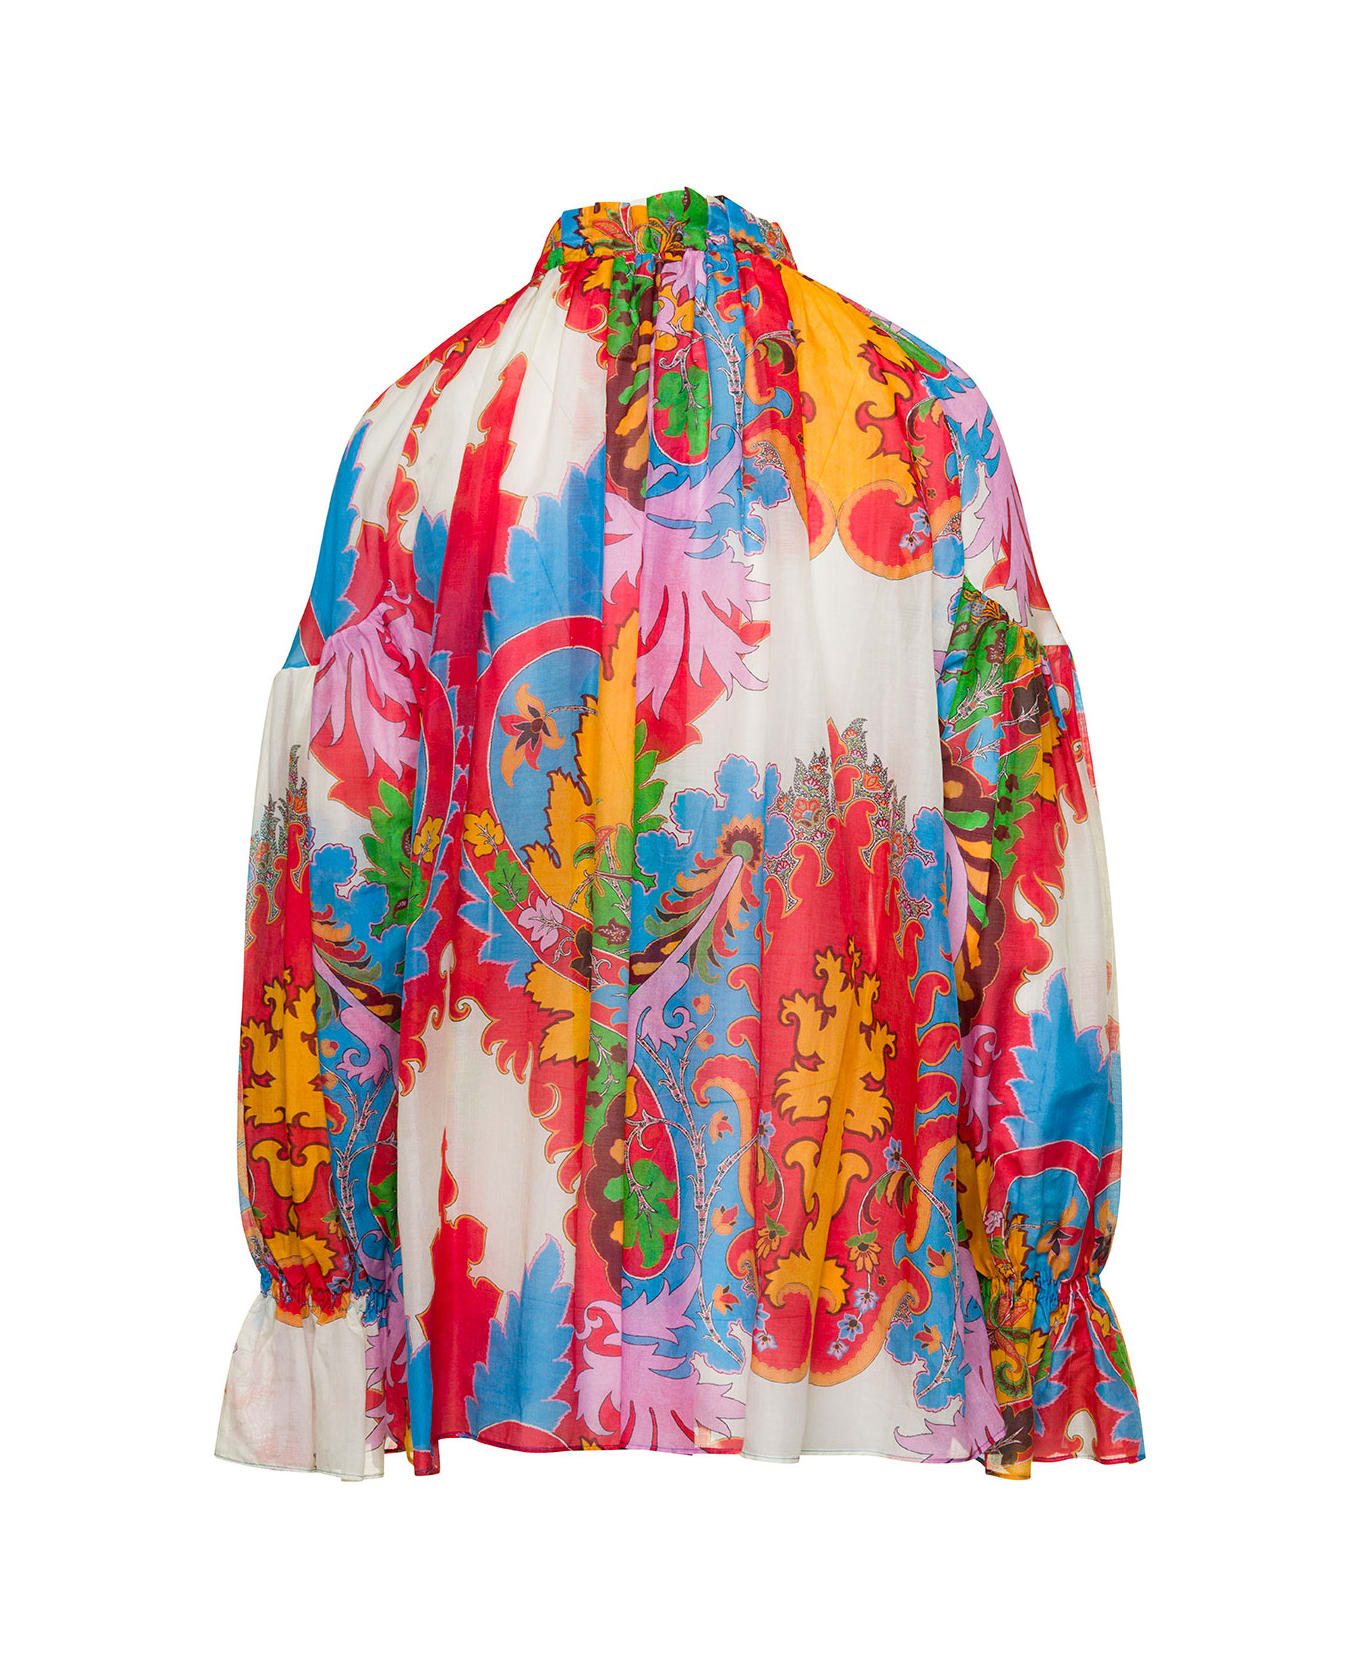 Etro Multicolor Blouse With Puff Sleeves And All-over Graphic Print In Silk And Cotton Blend Woman - Multicolor